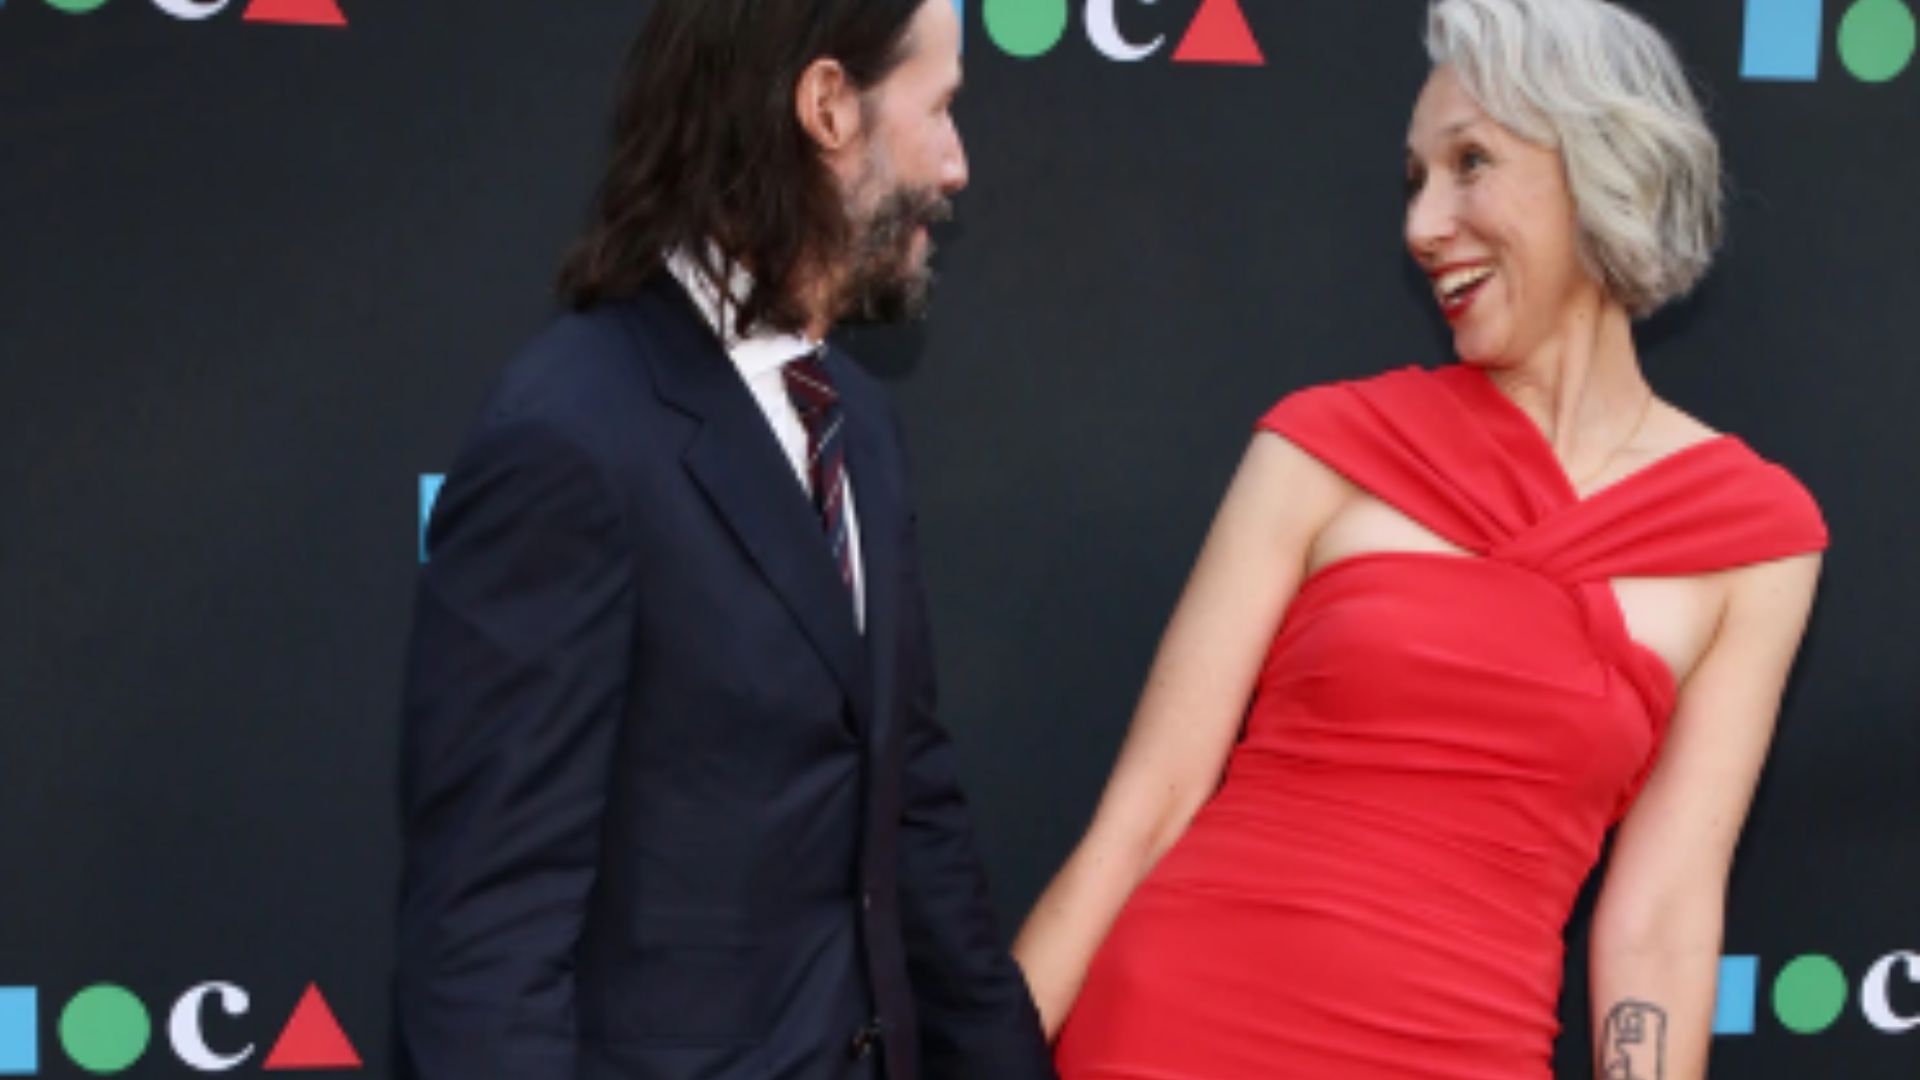 See Keanu Reeves' Candid Date Night Photo With GF Alexandra Grant